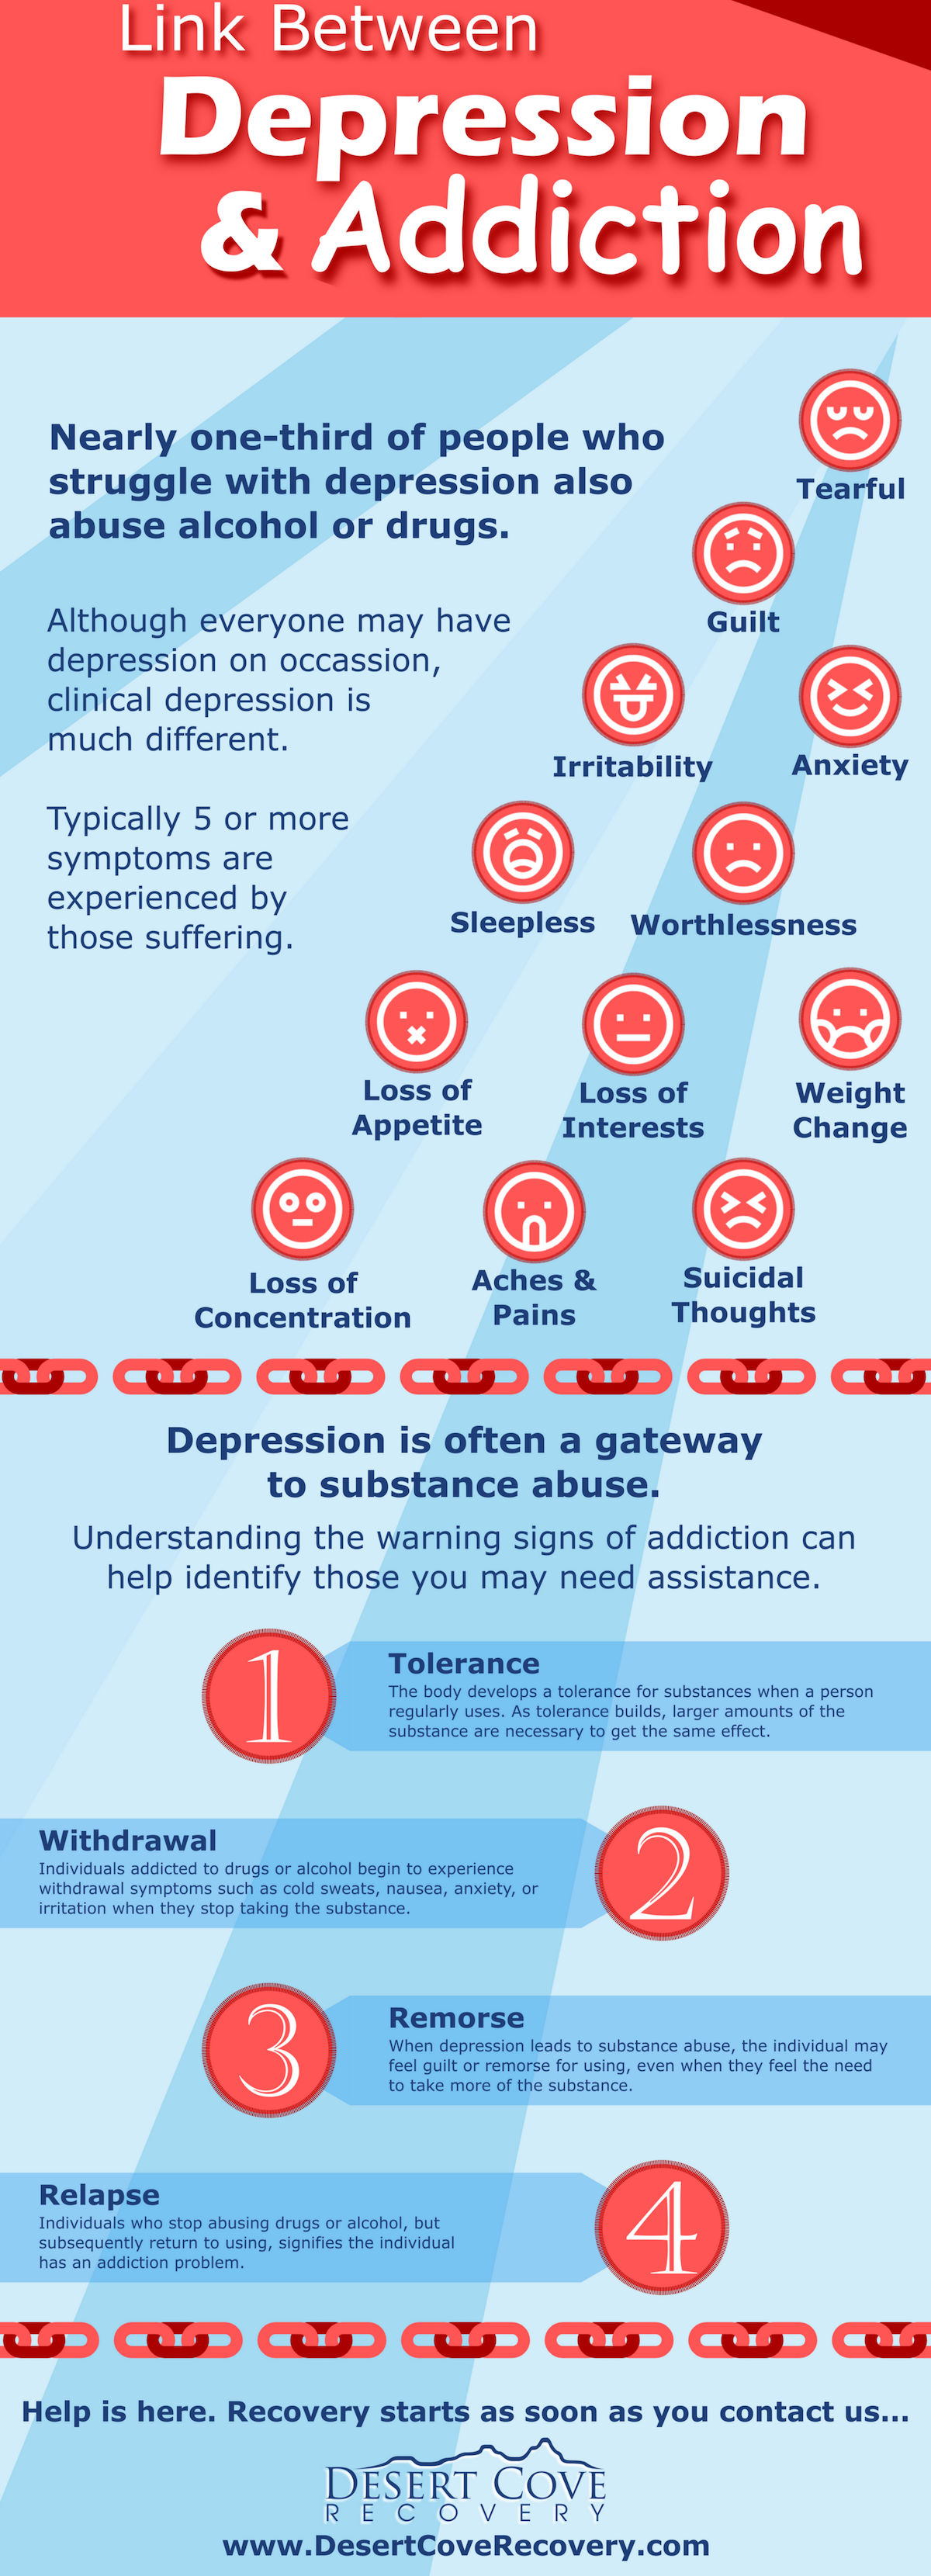 Link Between Depression and Addiction - Desert Cove Recovery